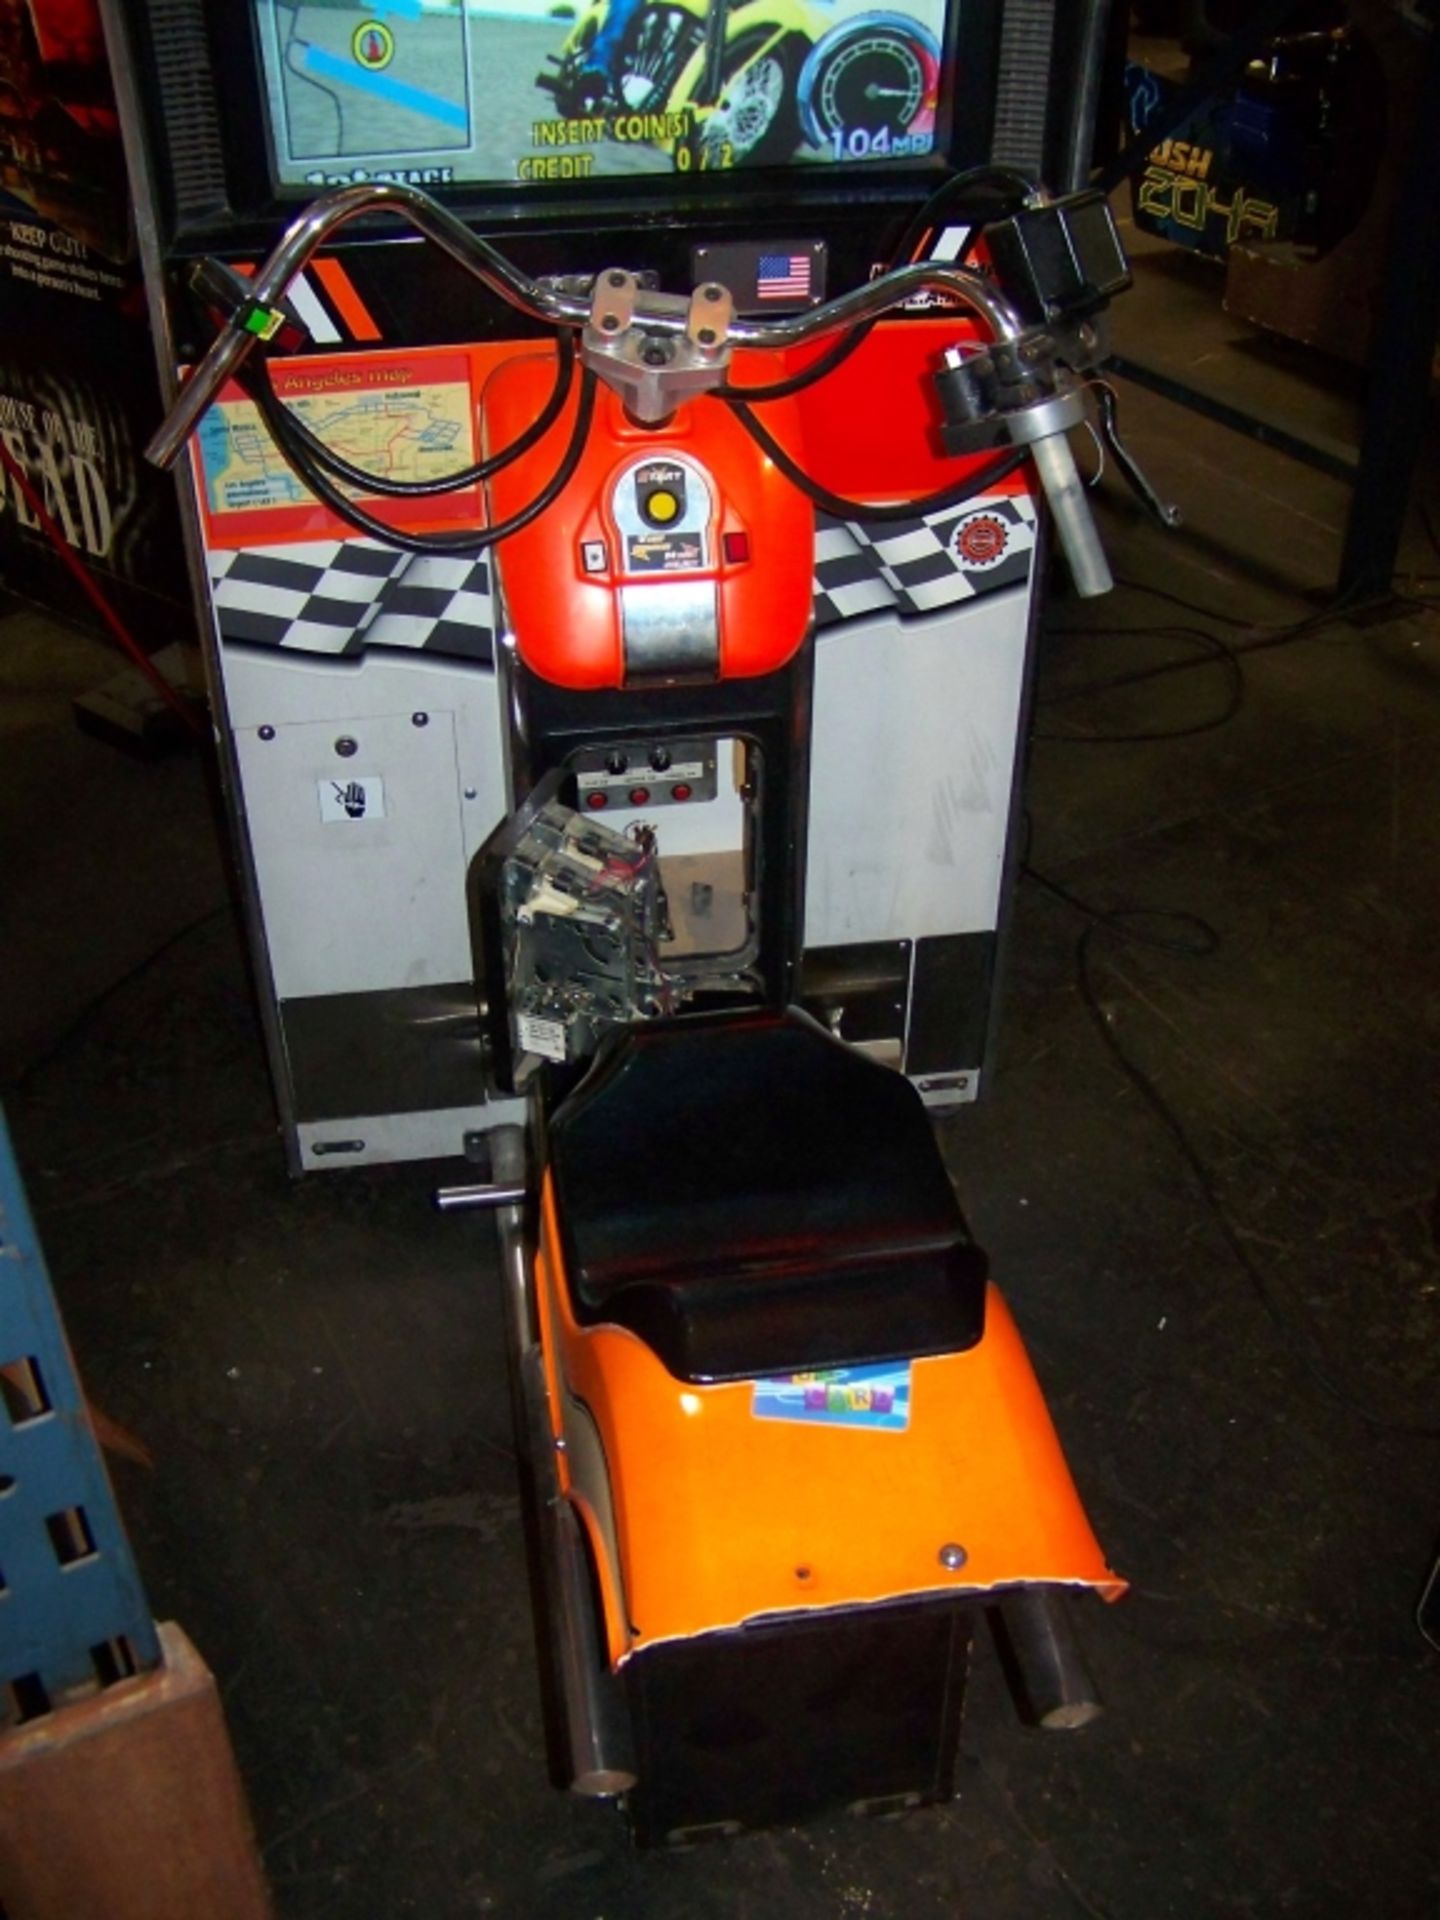 HARLEY DAVIDSON L.A. RIDERS RACING ARCADE SEGA Item is in used condition. Evidence of wear and - Image 5 of 5